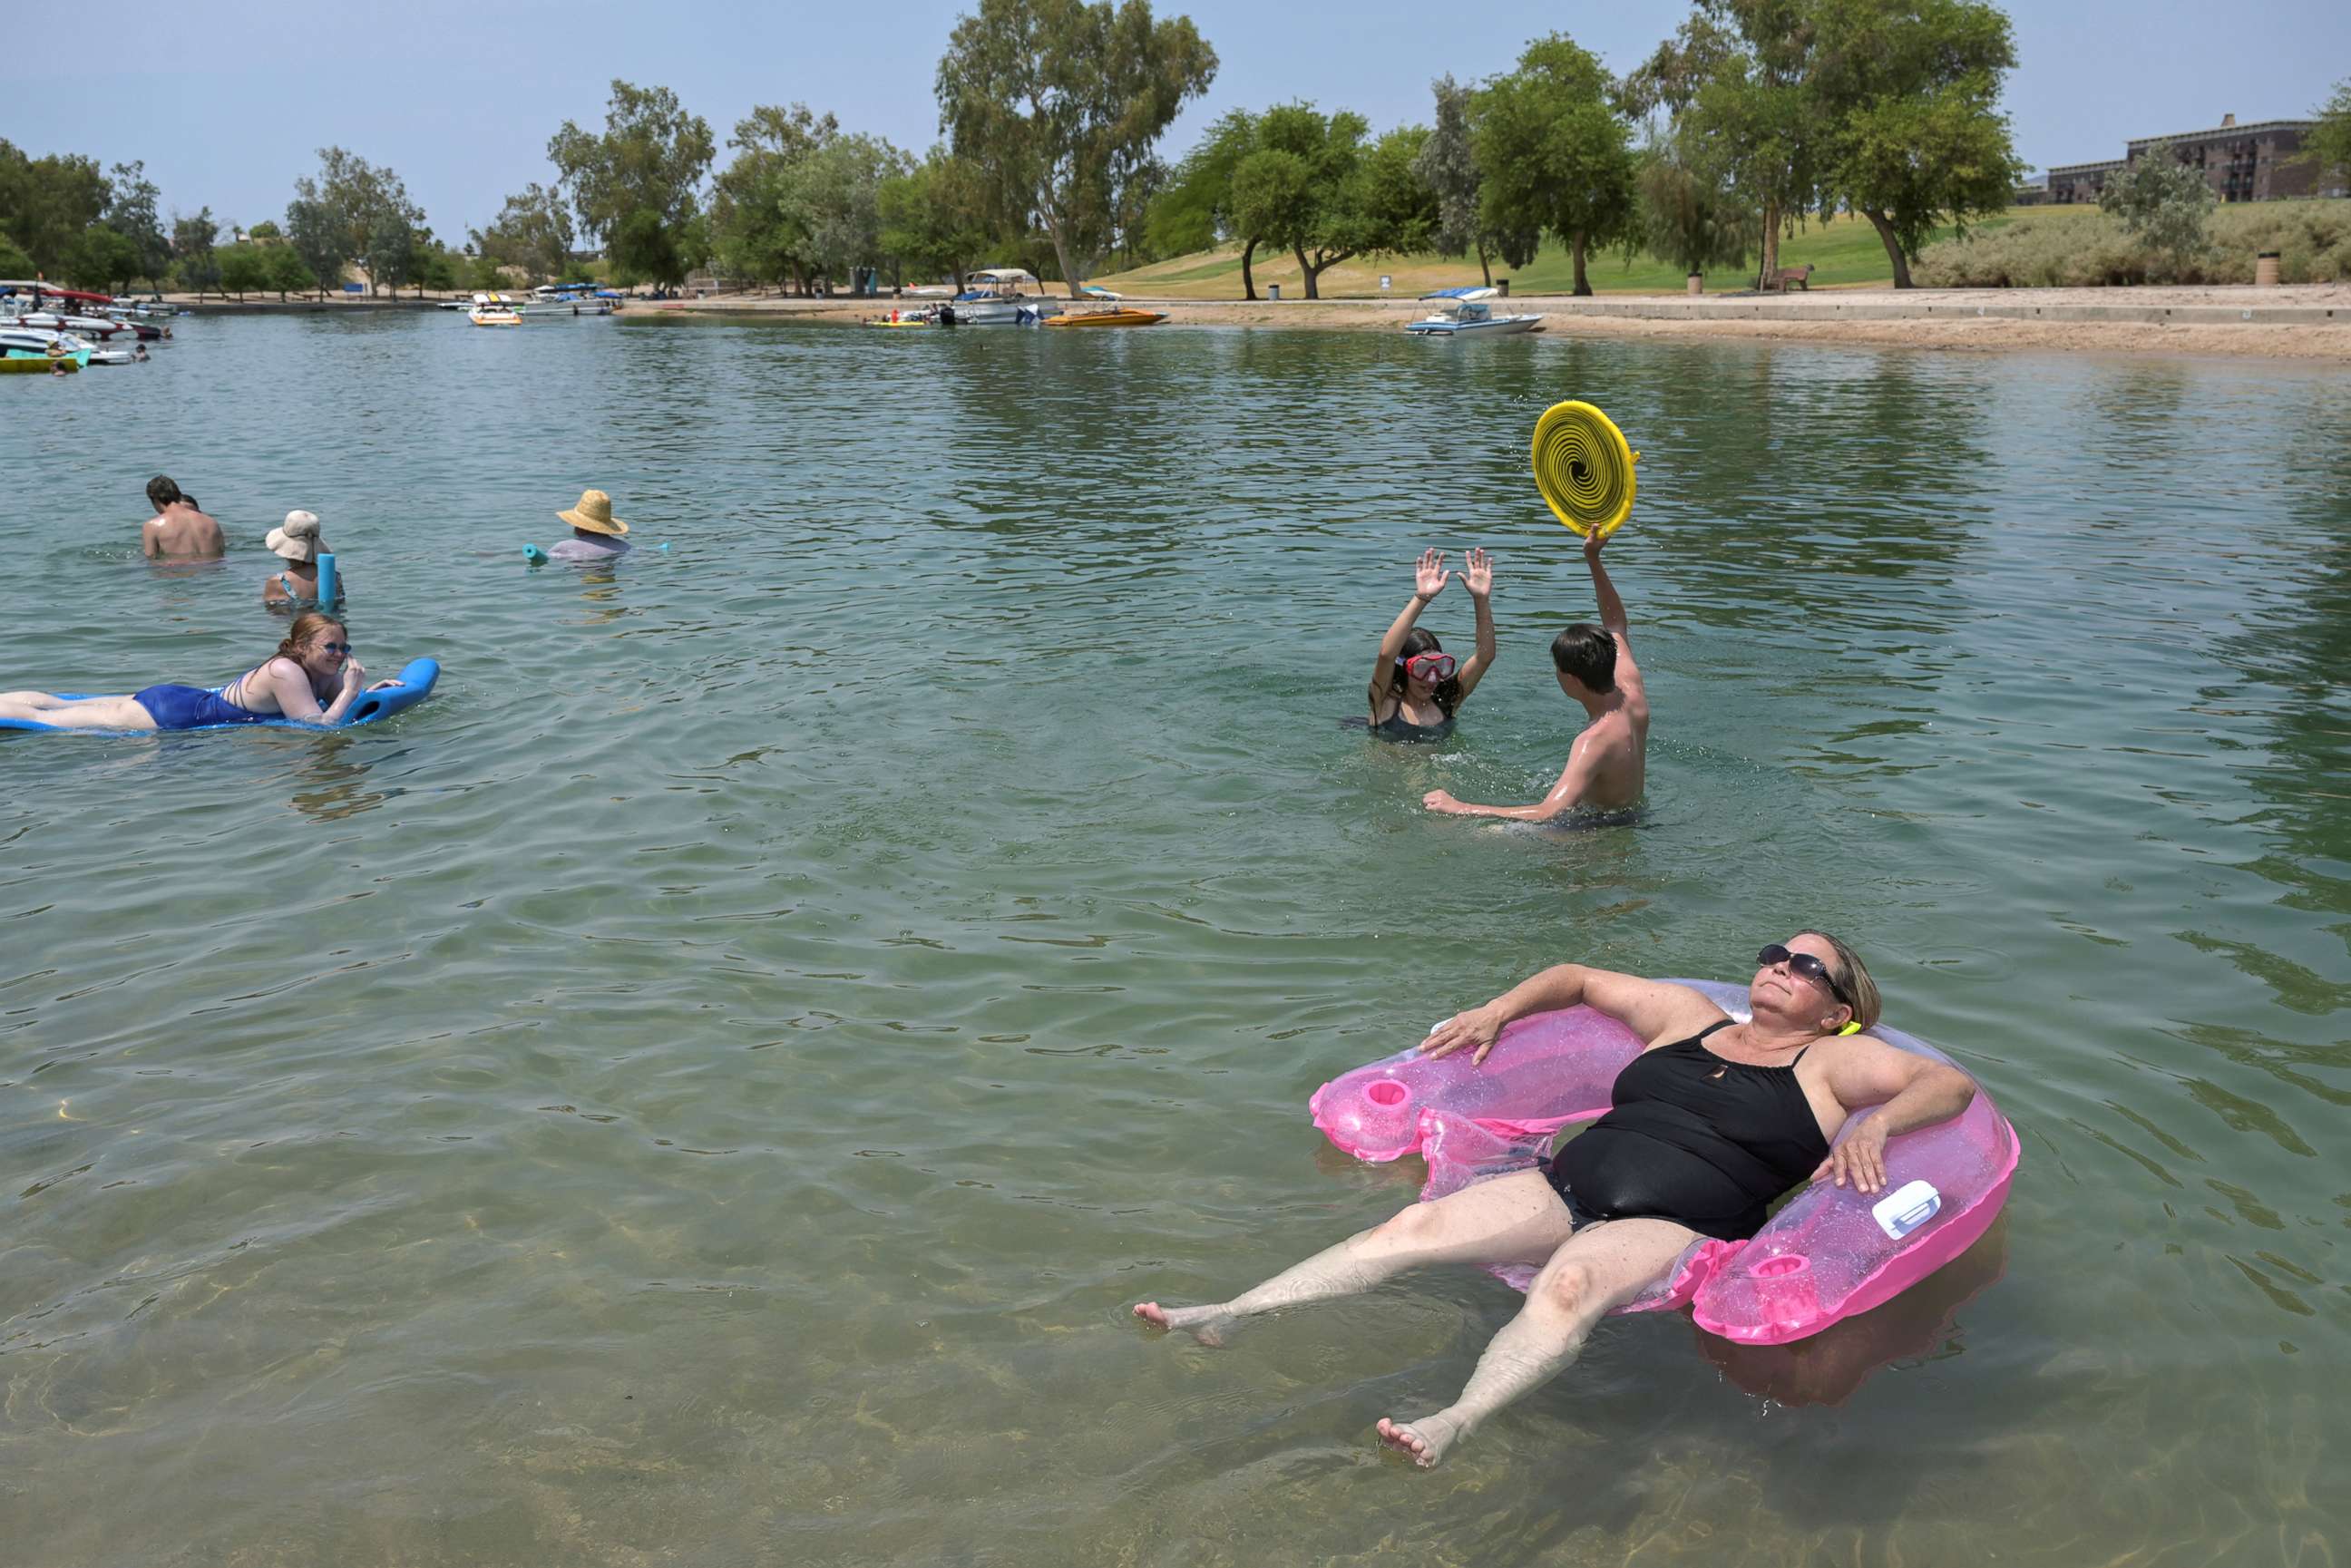 PHOTO: Tricia Watts, right, uses a floaty as she cool off in the water during a heat wave in Lake Havasu, Ariz., June 15, 2021.